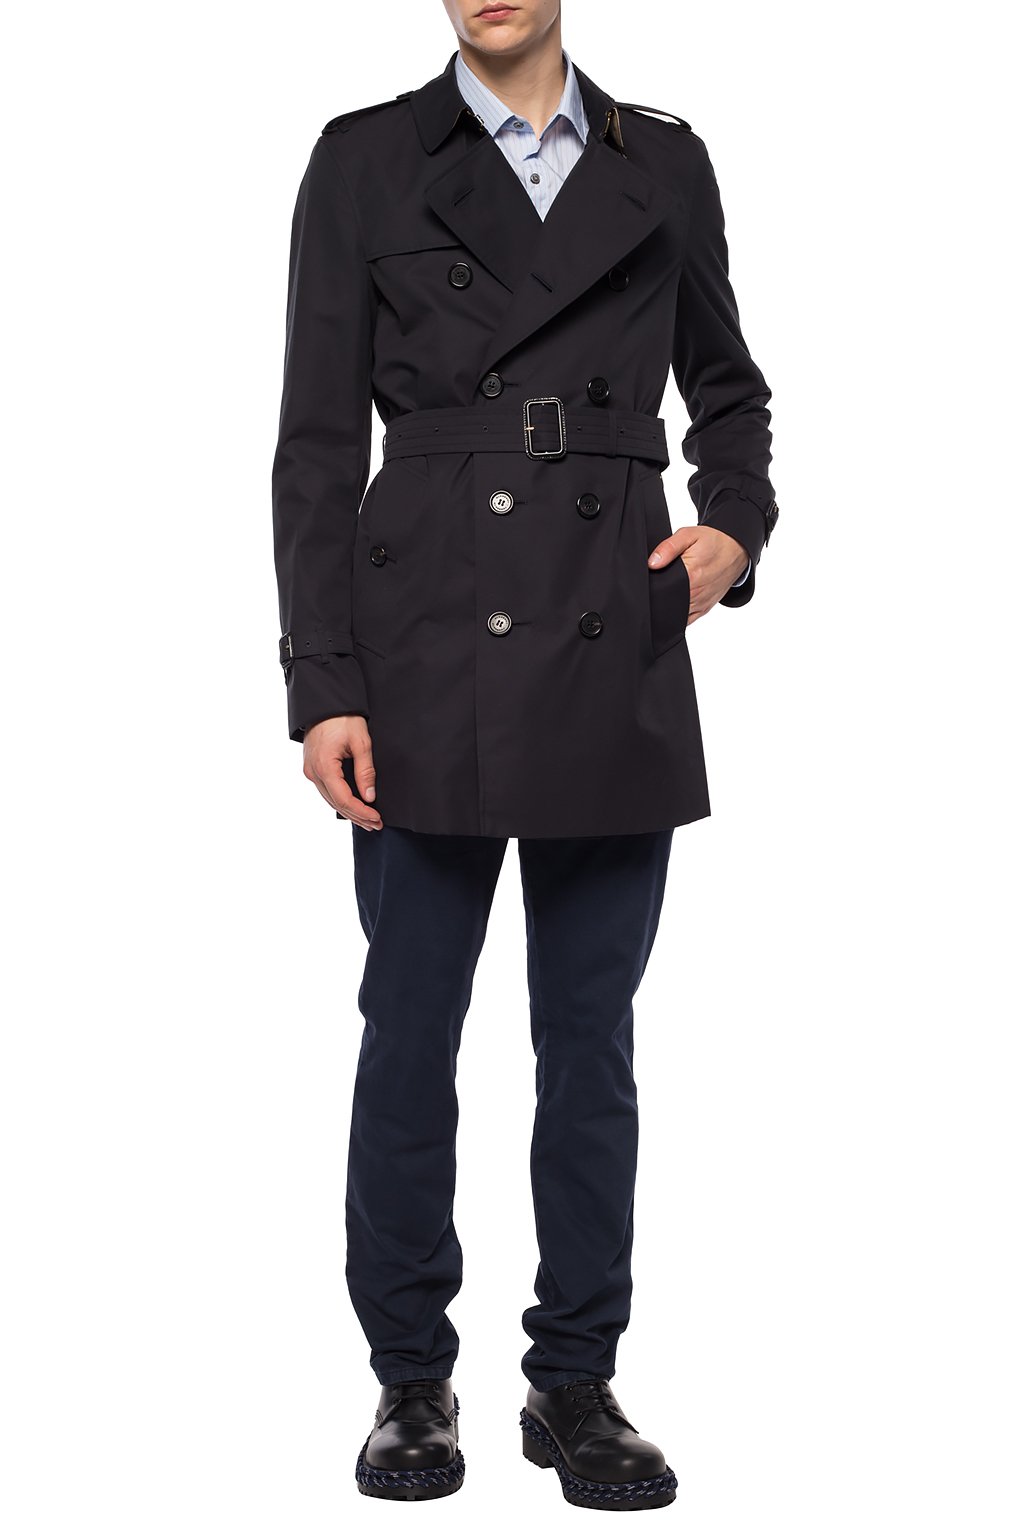 Burberry 'The Kensington' Double-Breasted Trench Coat